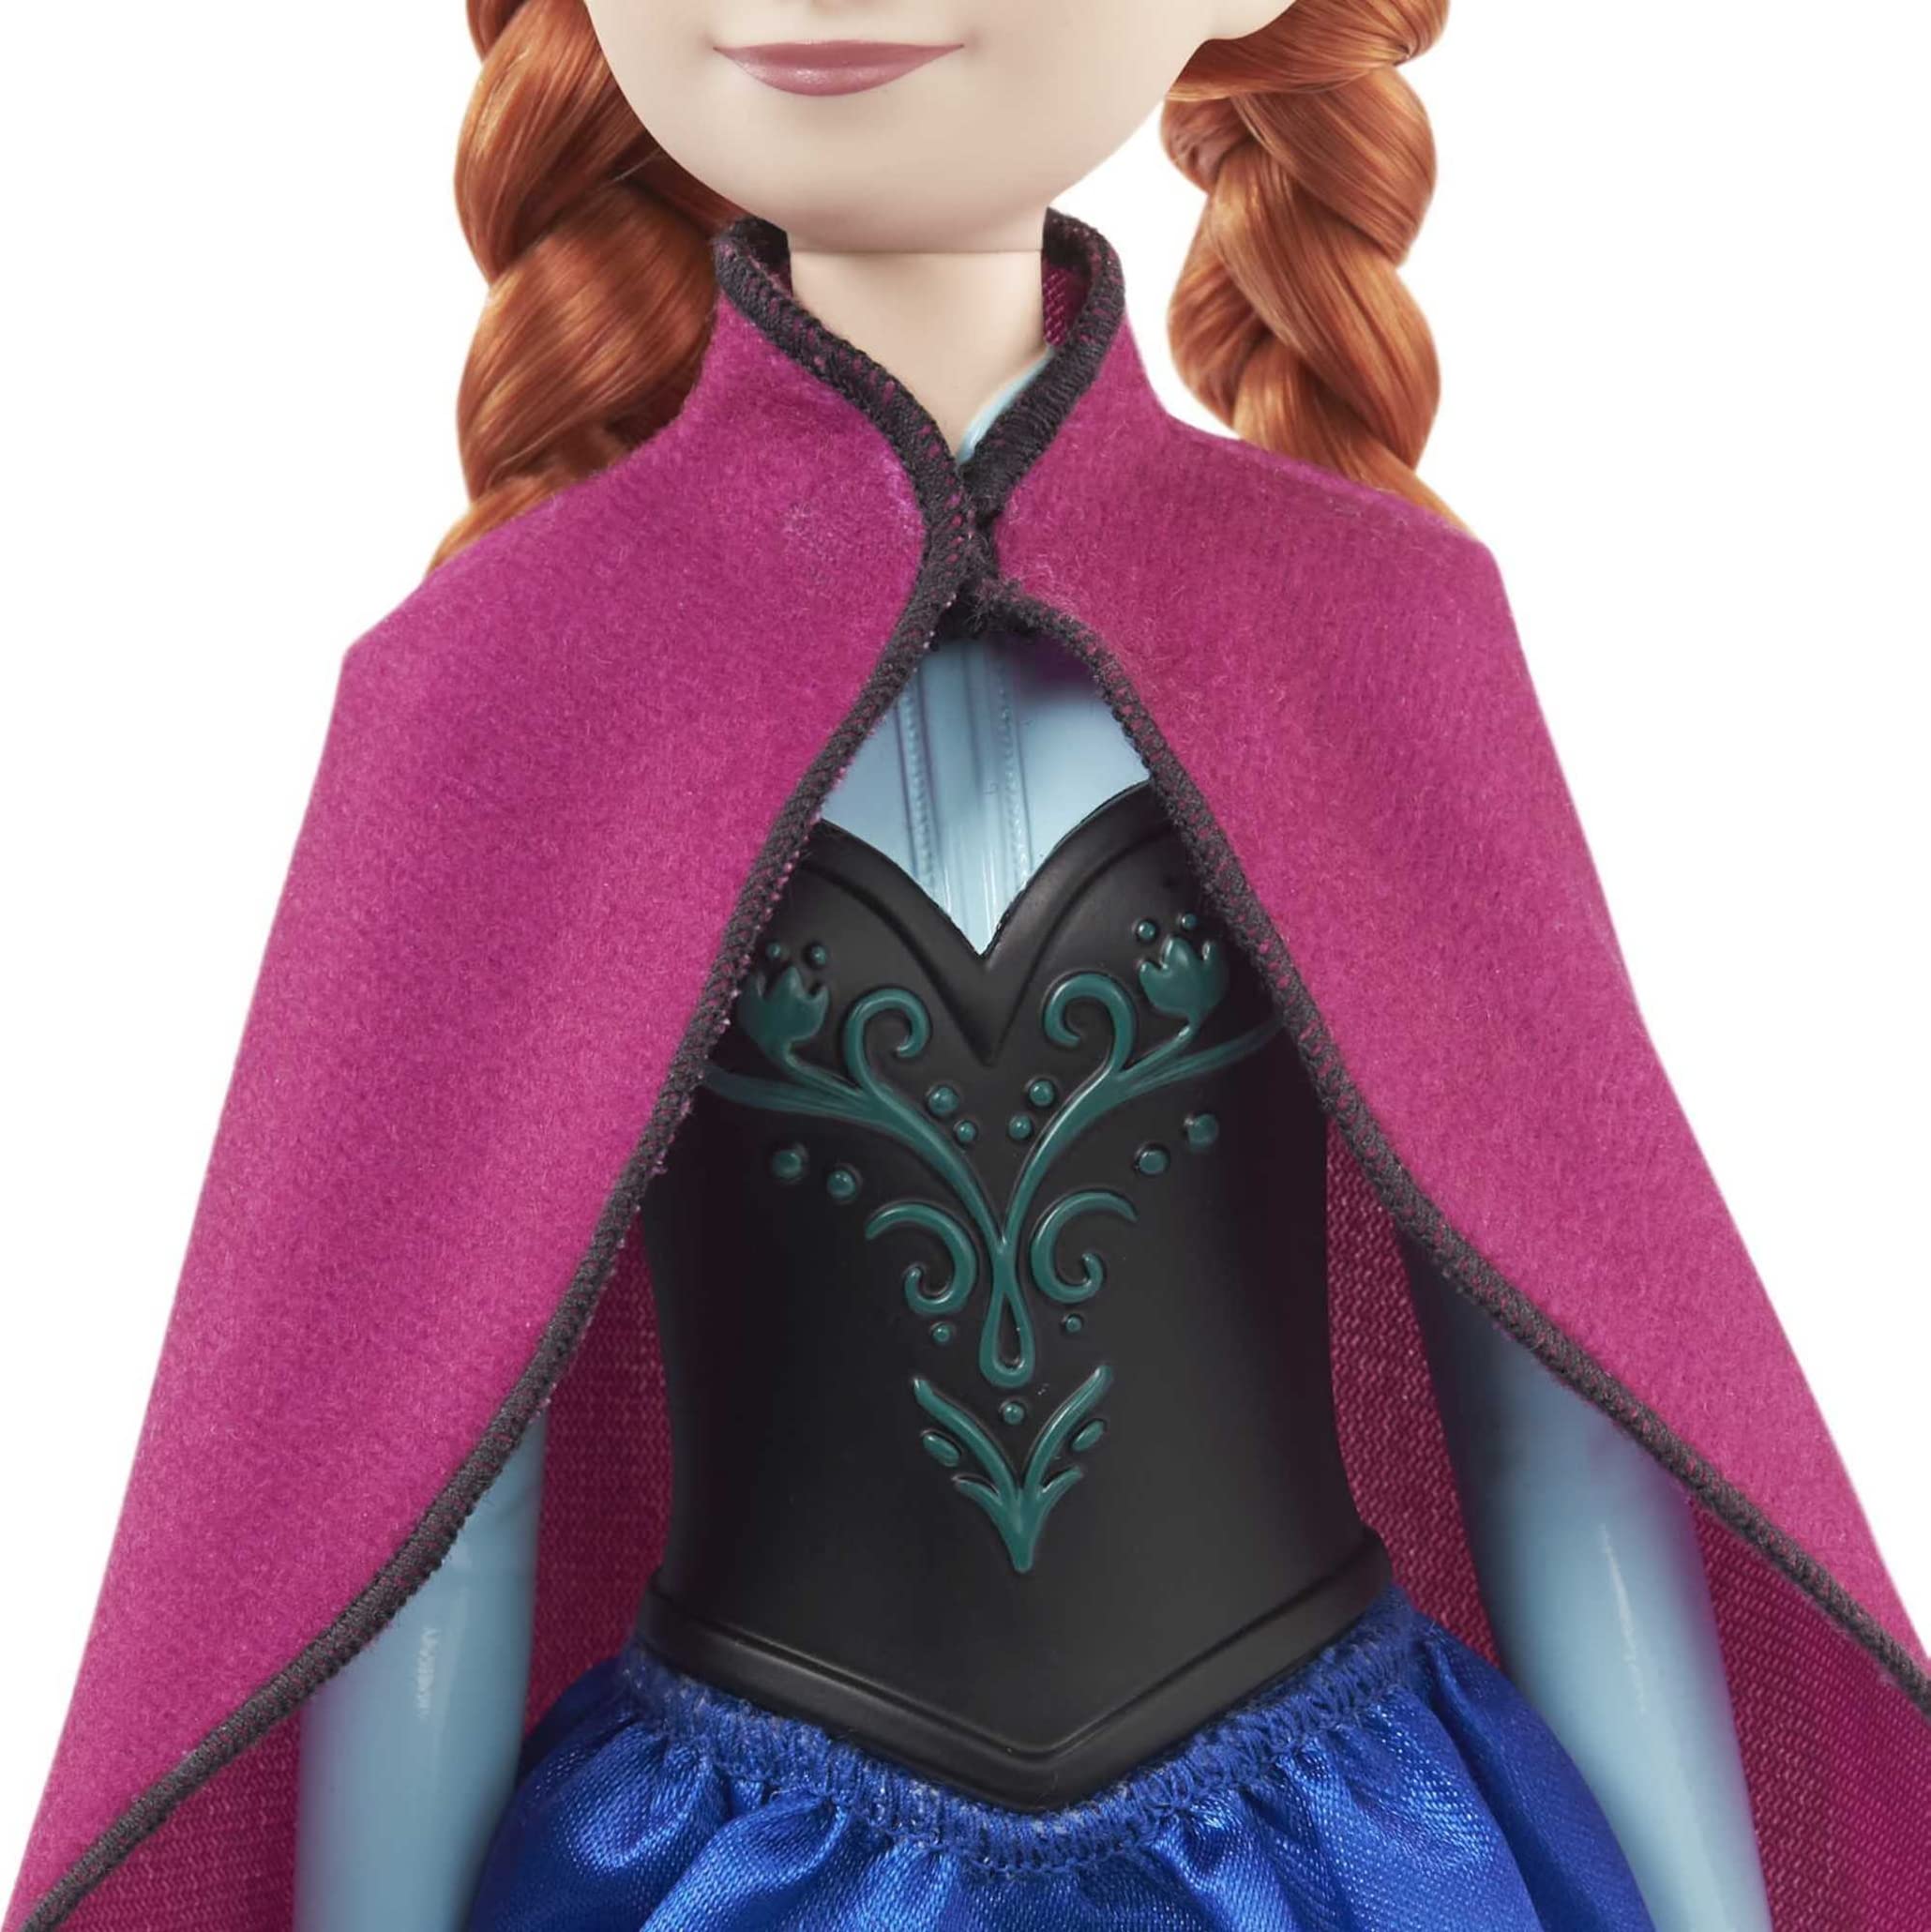 Disney Frozen Anna Fashion Doll & Accessory, Signature Look, Toy Inspired by the Movie Disney Frozen